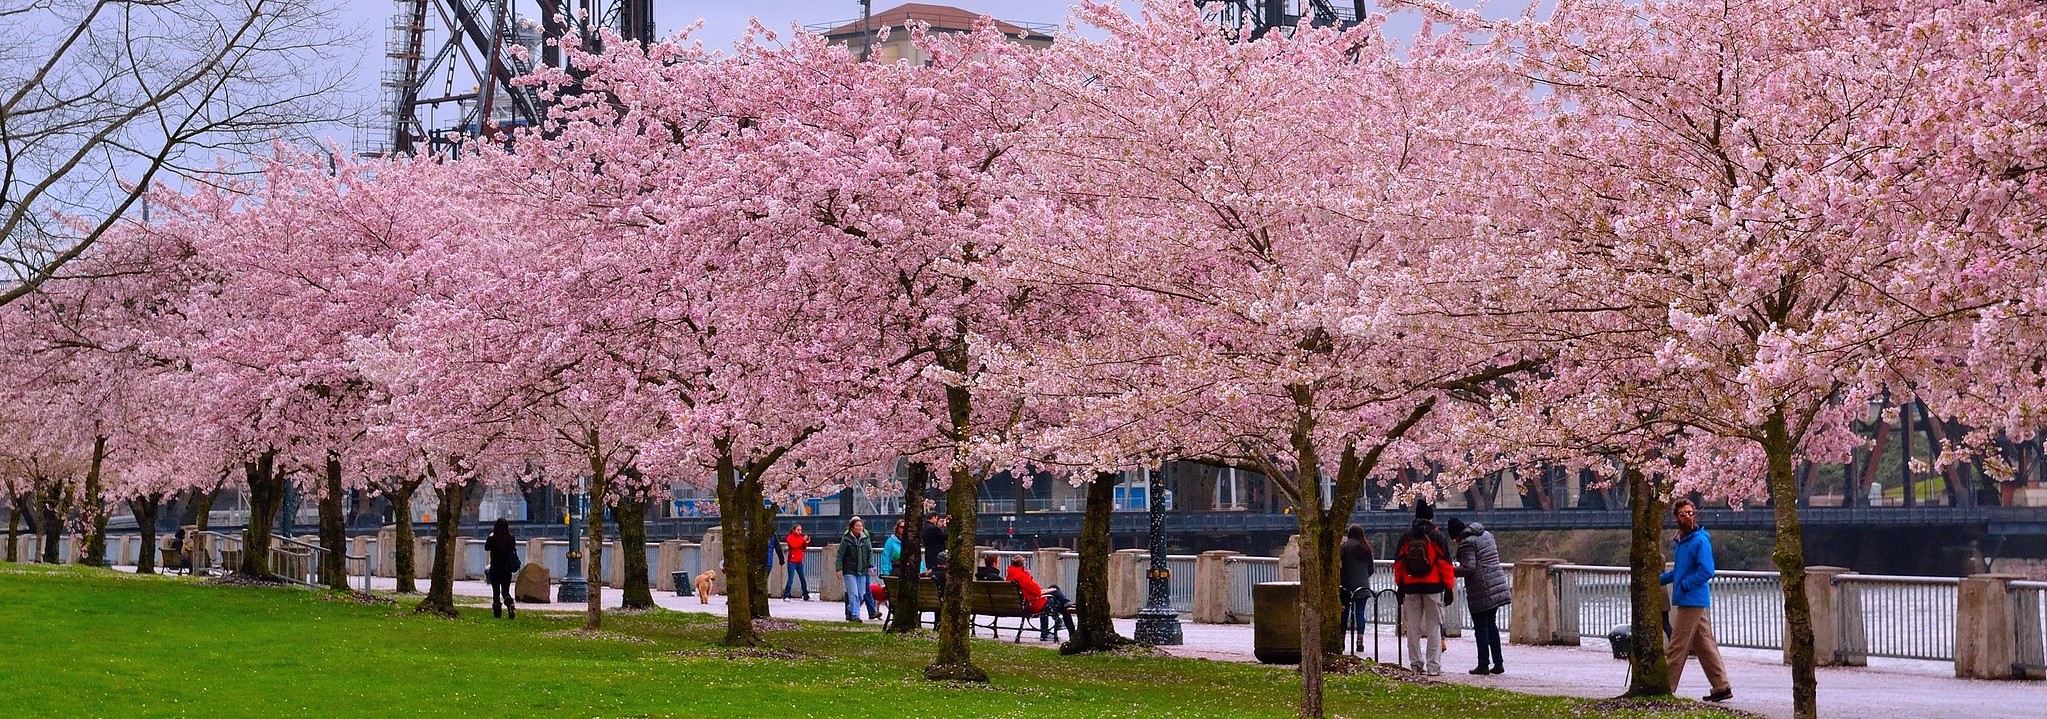 Trees with pink blossoms with grass and people walking in the background